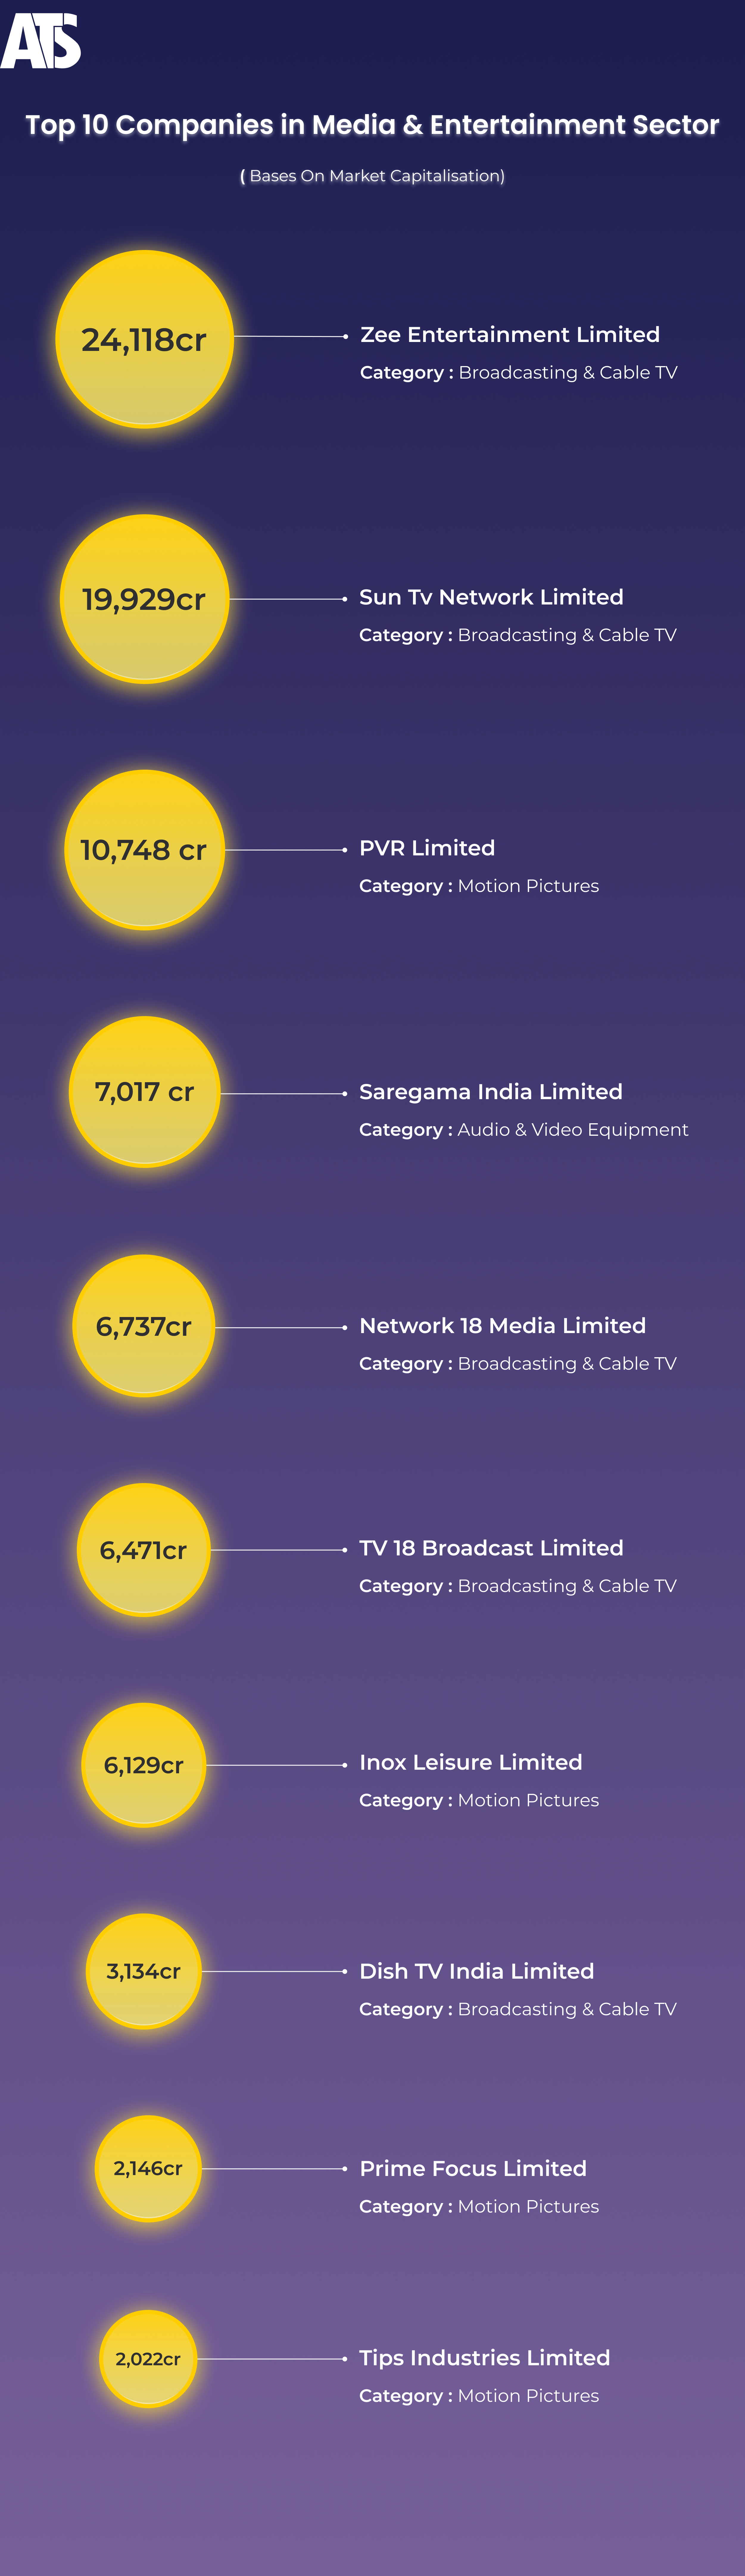 Top 10 Companies in Media & Entertainment Sector